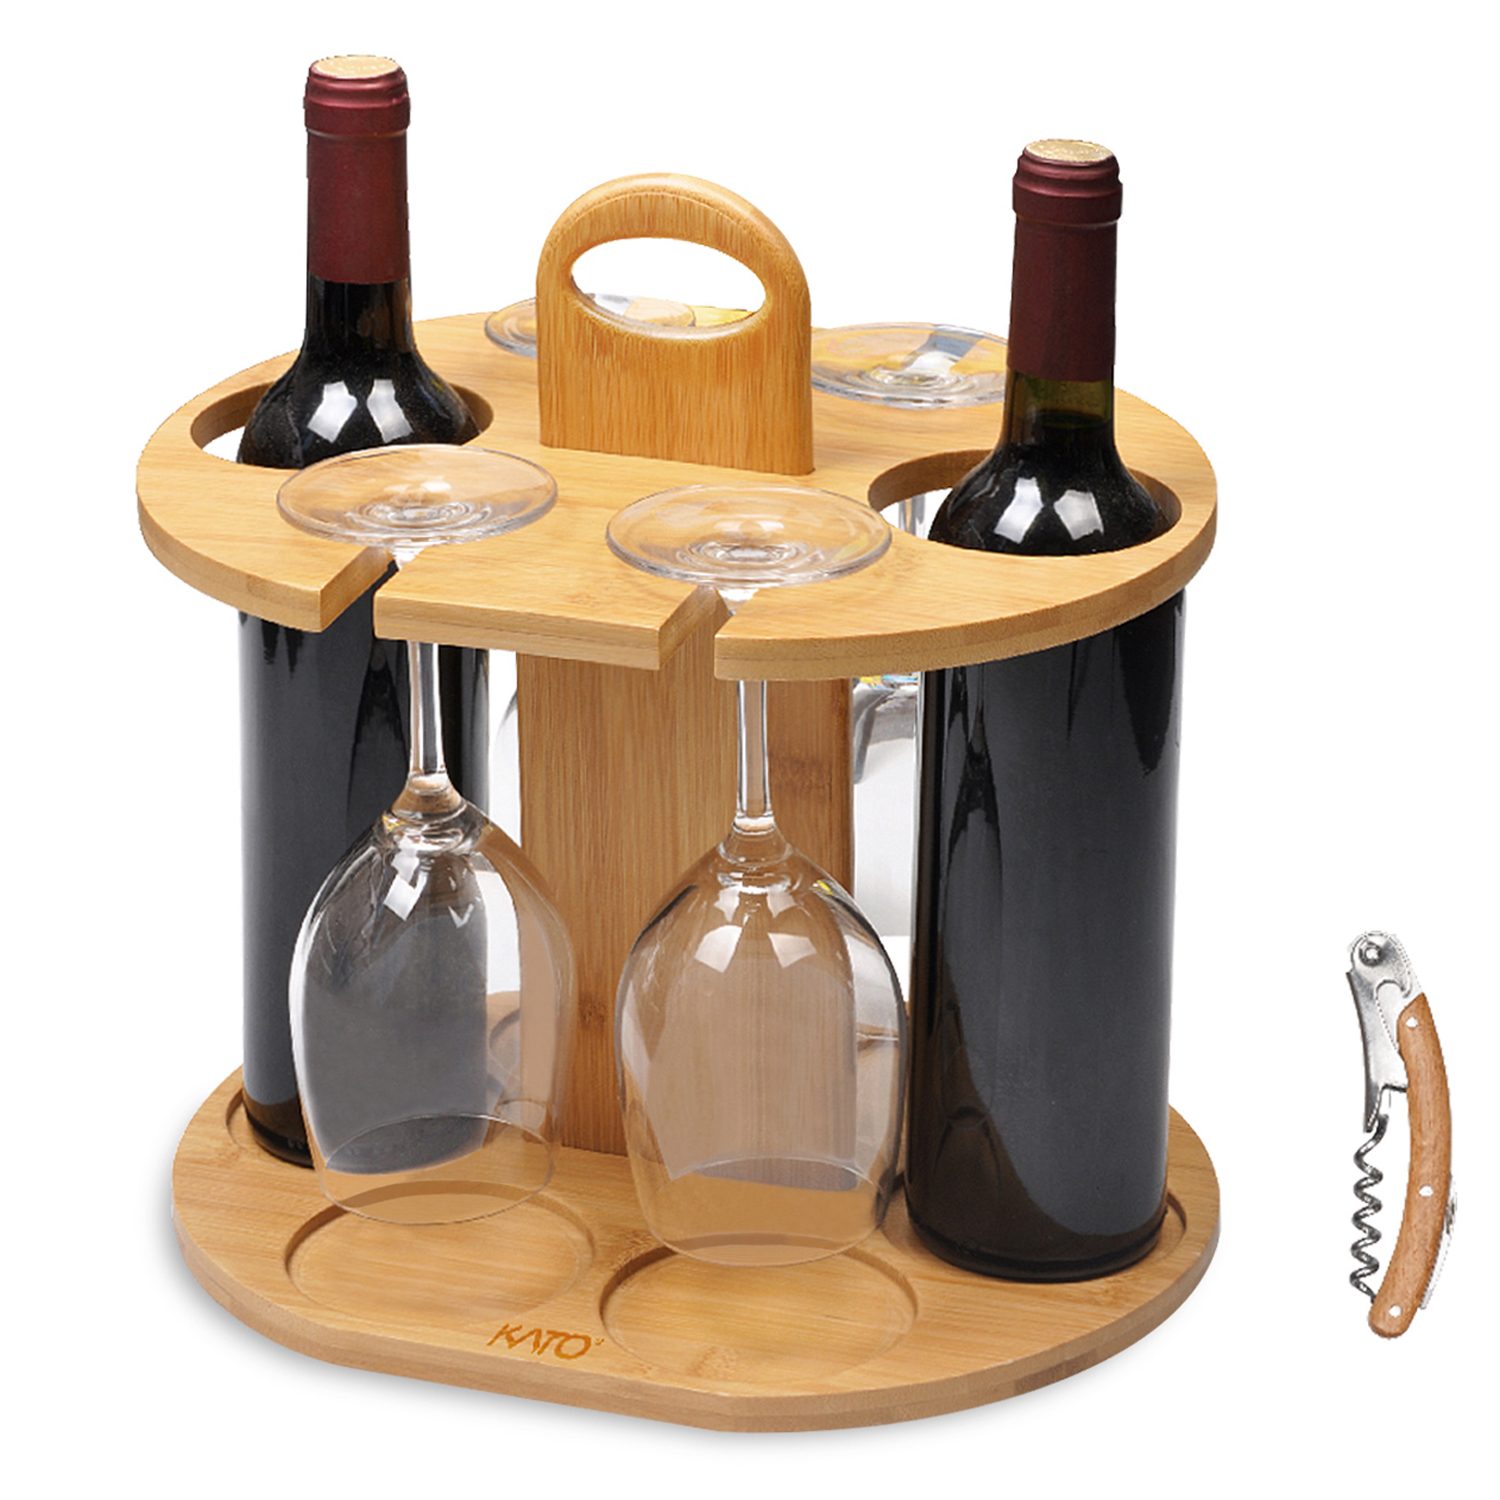 Kato Wine Bottle Holder  Glass Rack, Wine Glass Hanging Drying Stand  Organizer on Countertop Tabletop with Free Corkscrew, Bamboo